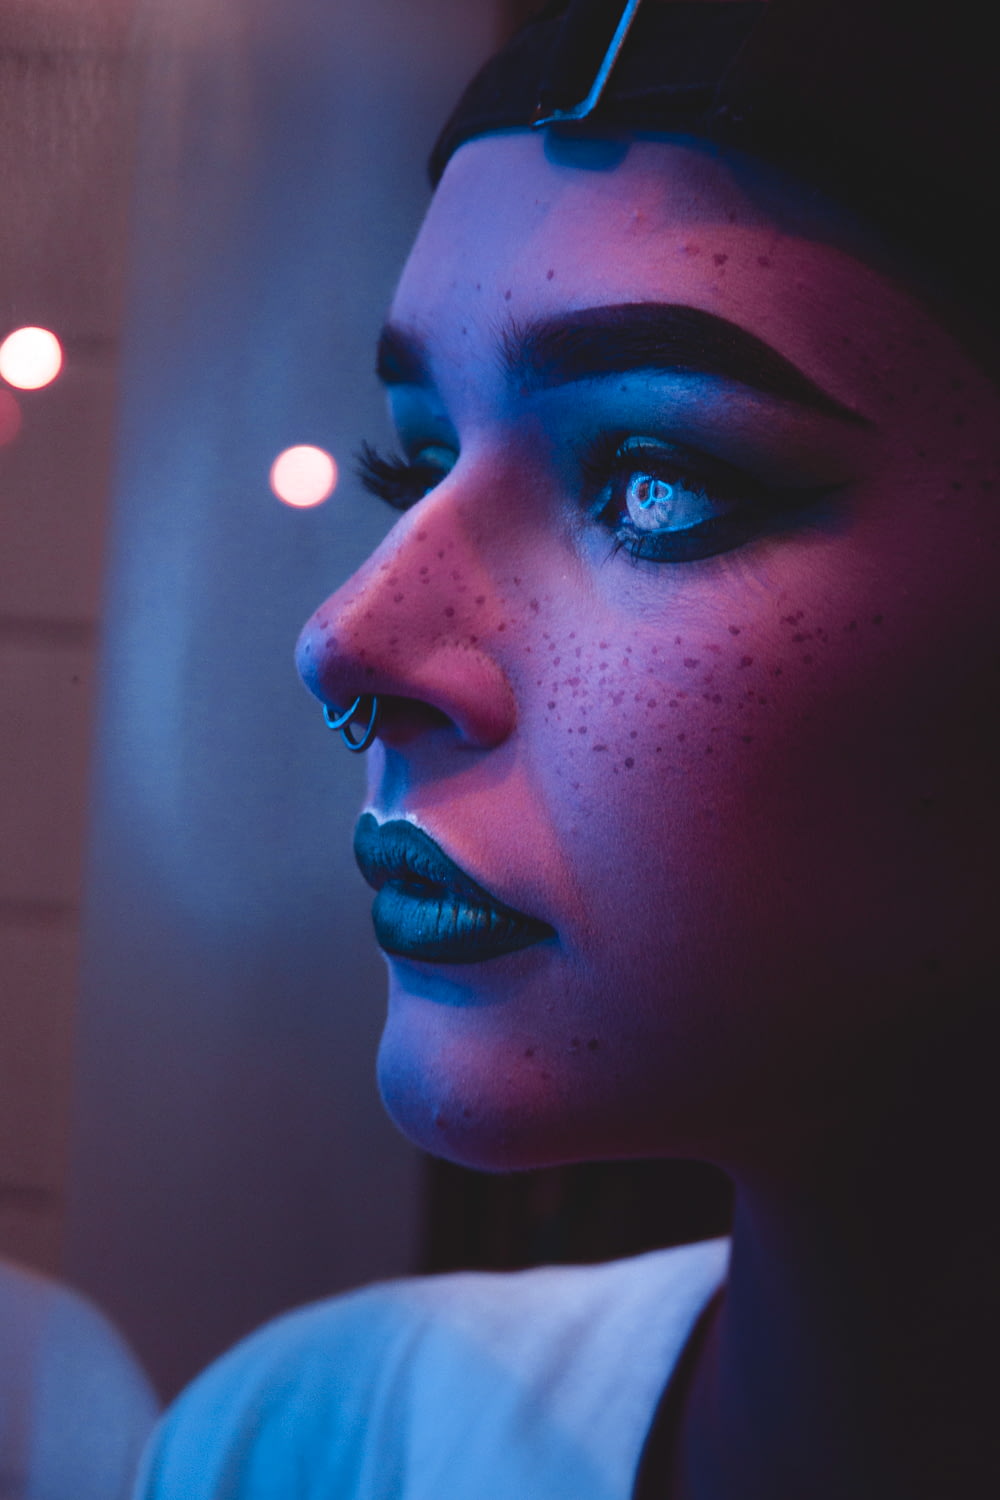 photo of woman with black lipsticks and nose piercings captured inside dim light room